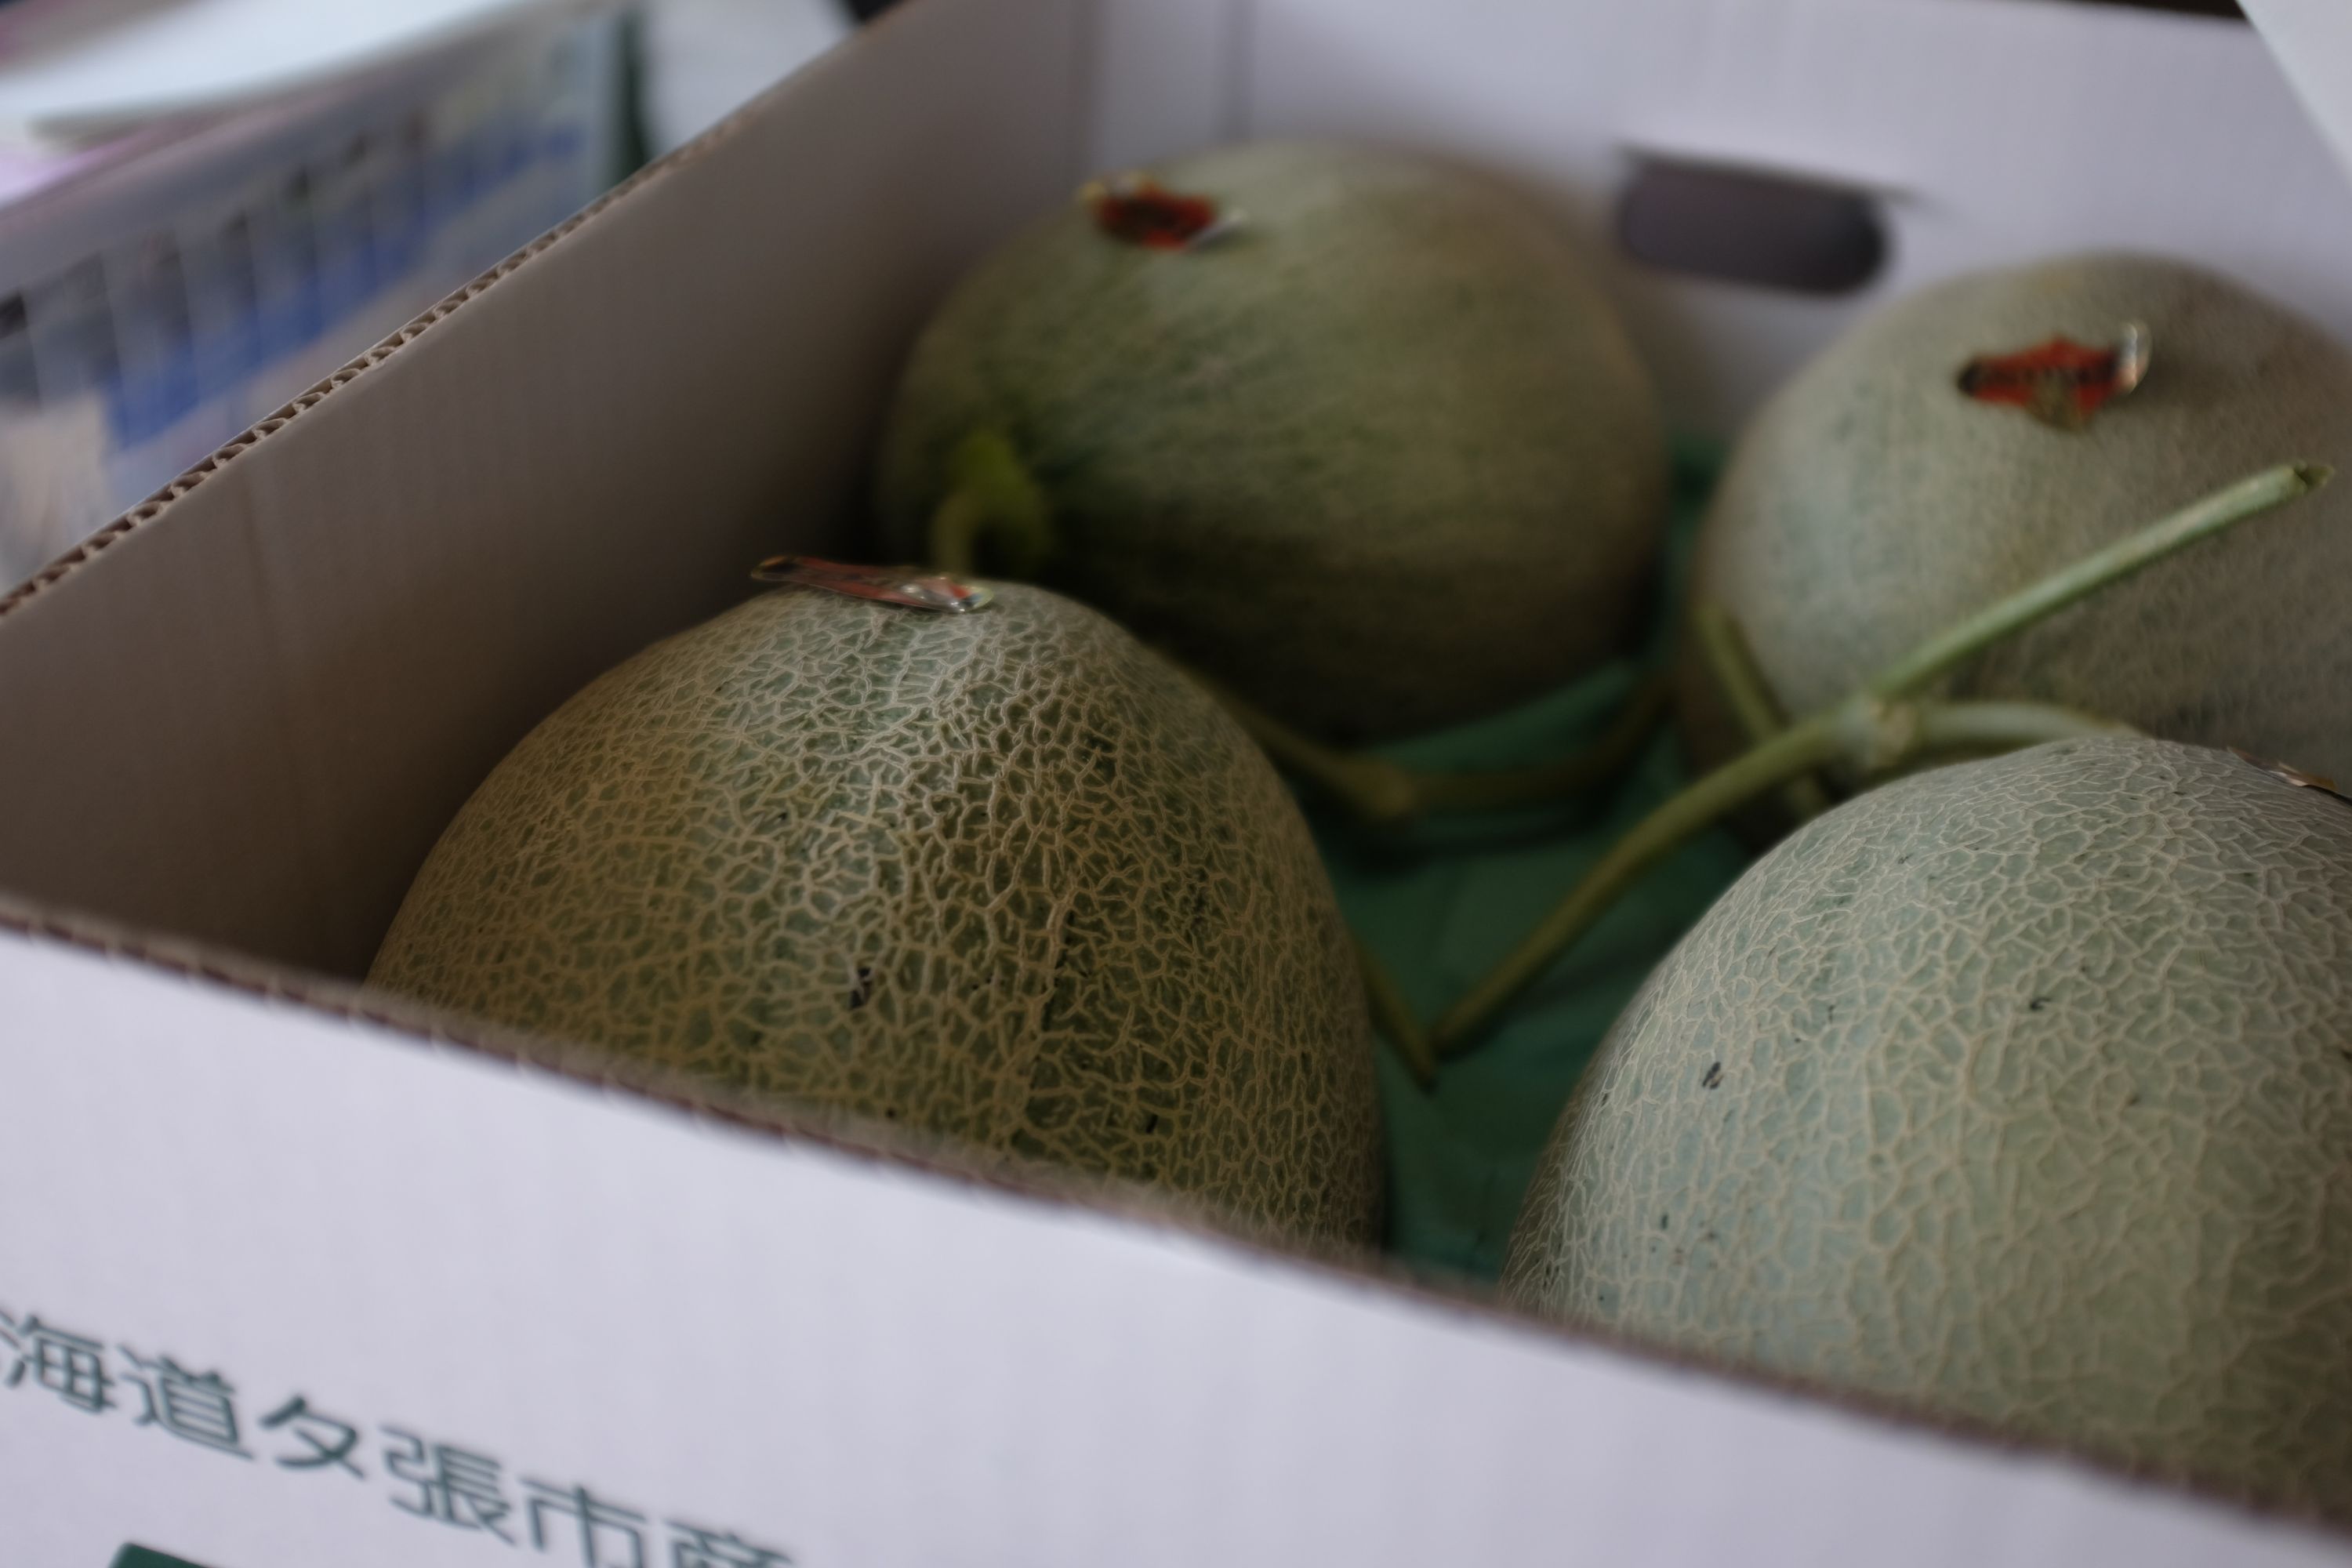 Closeup of the melons in the crate.